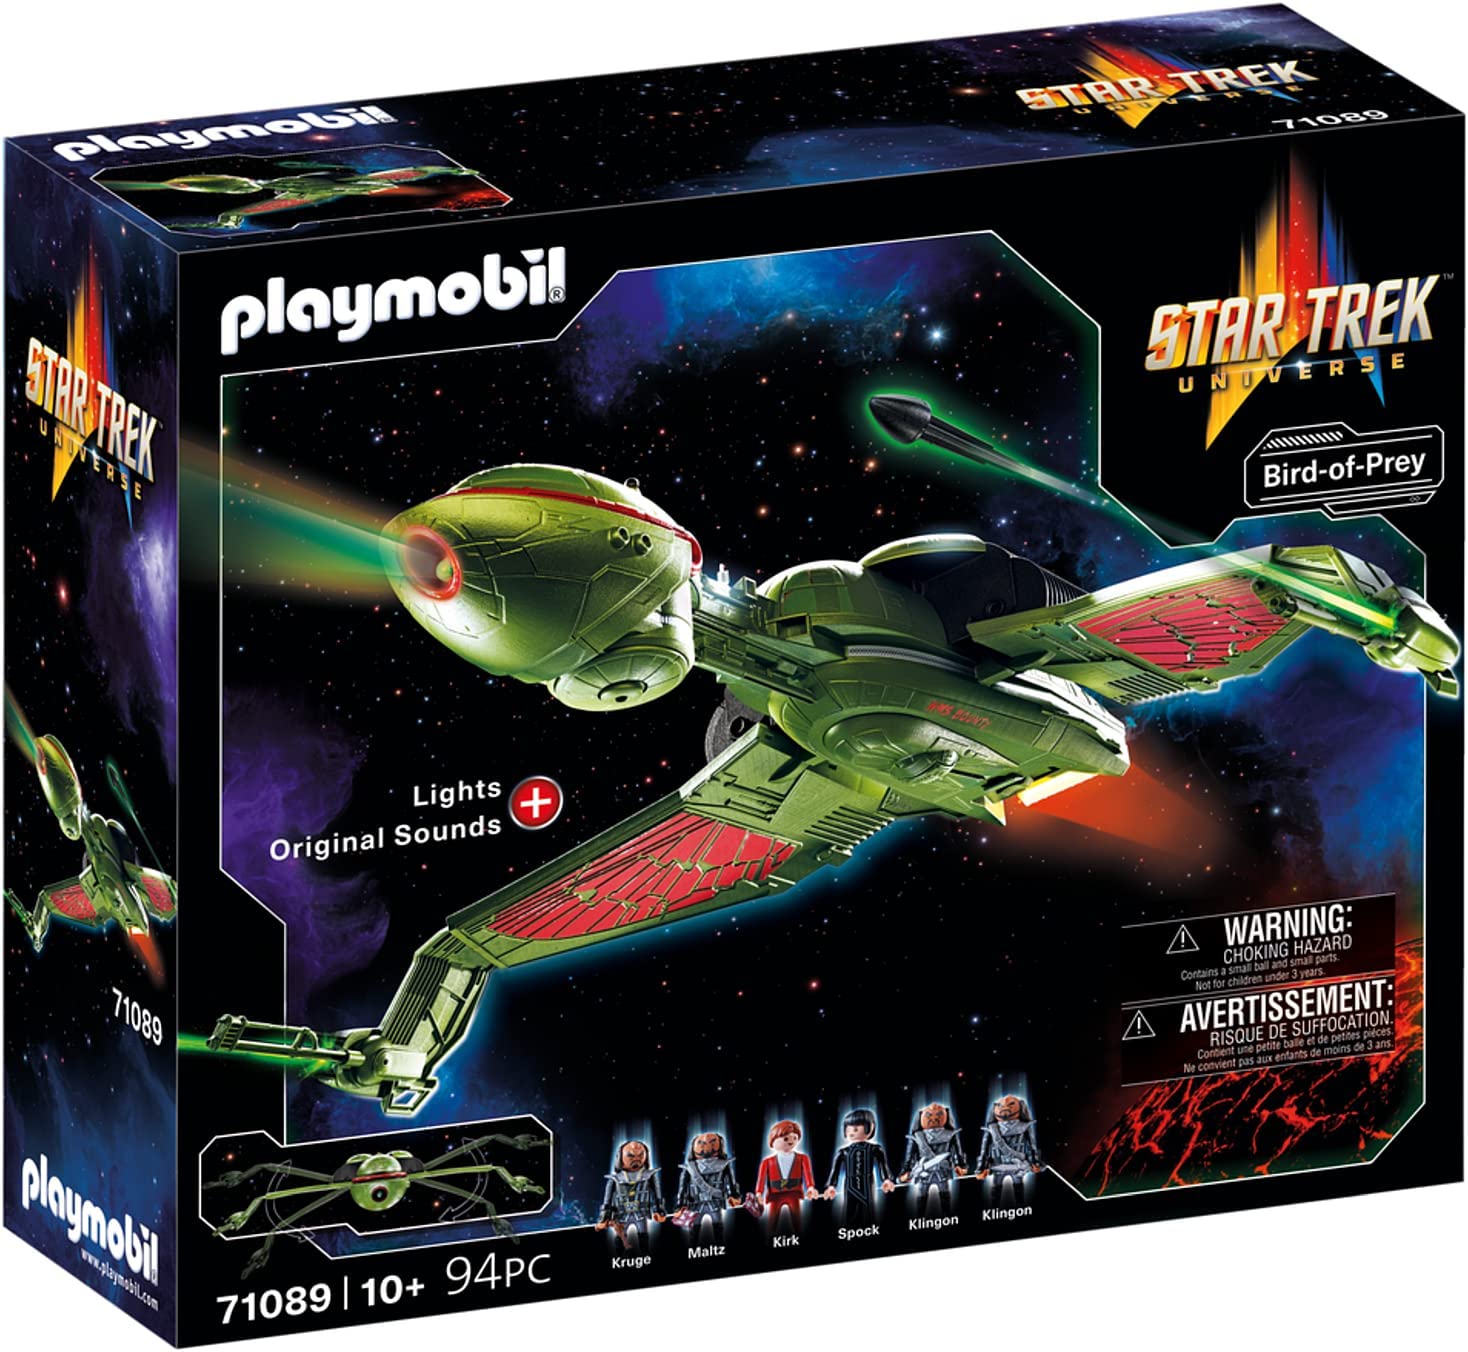 PLAYMOBIL 71089 Star Trek - Klingon Ship: Bird-of-Prey, Blingon Ship with Light Effects, Original Sounds and Collectible Figures, for Star Trek Fans and Children from 10 Years